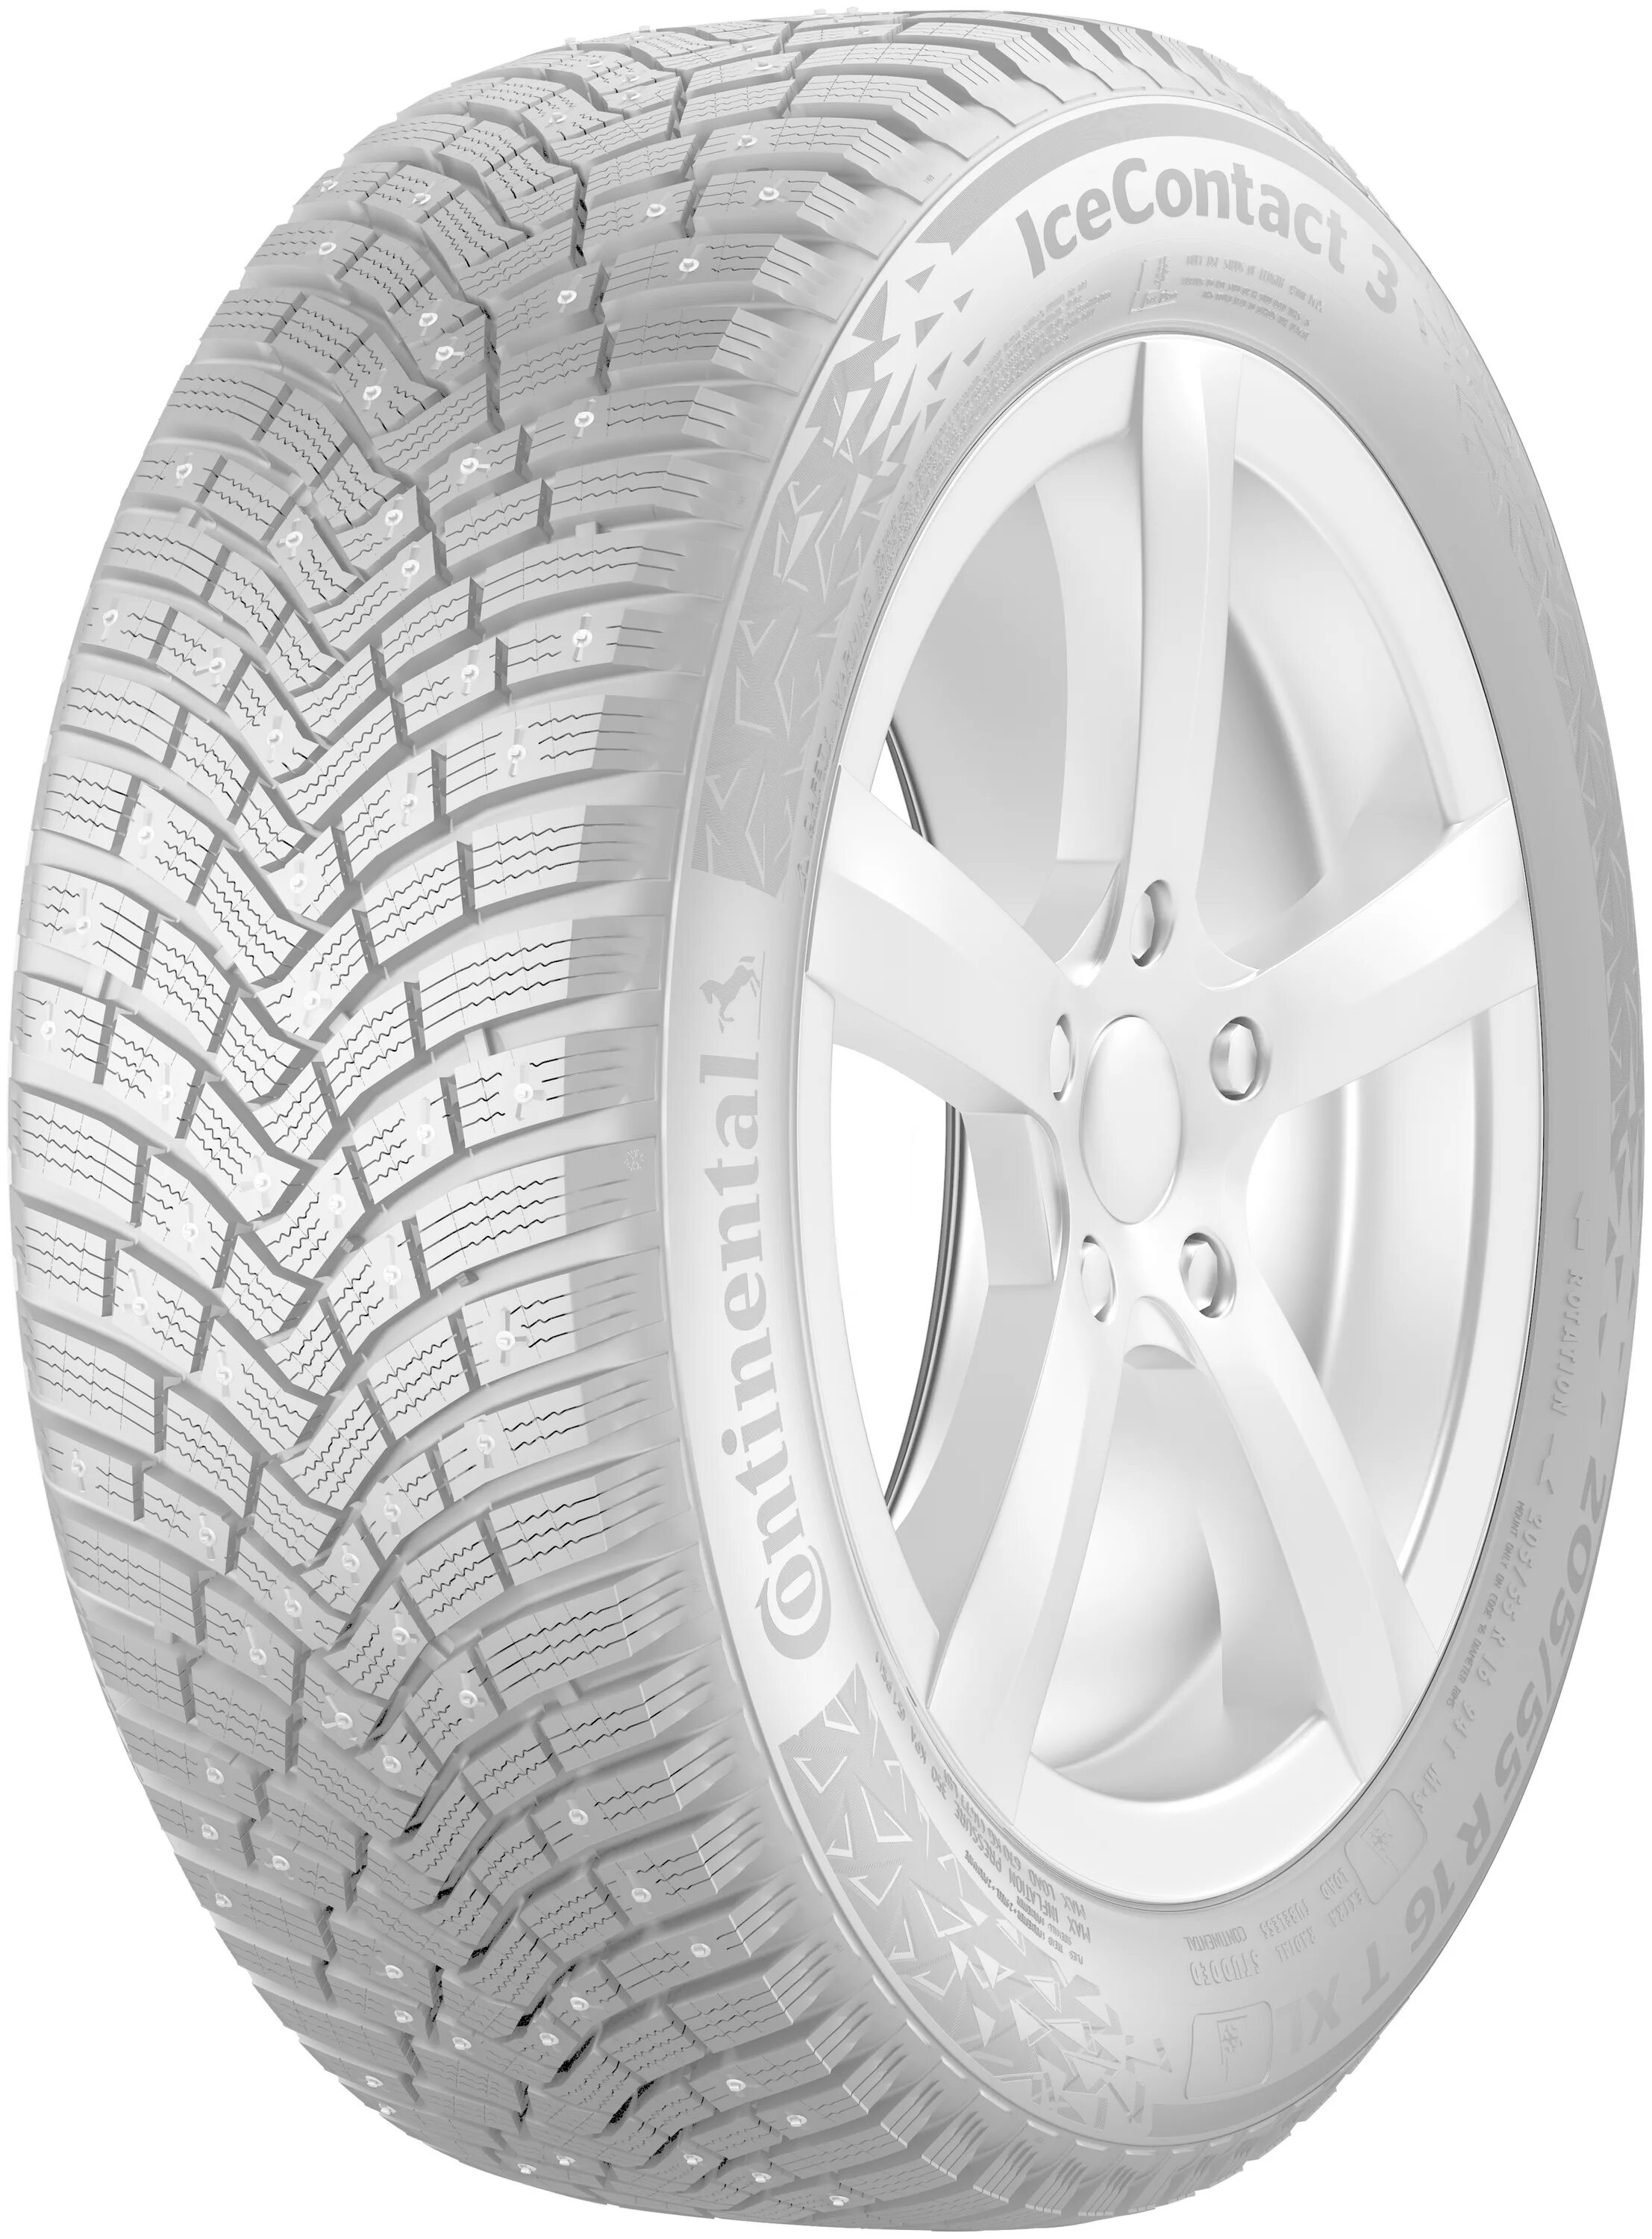 Continental ICECONTACT 3. Continental 285/50r20 116t XL ICECONTACT 3 TL fr ta (шип.). Continental 225/65r17 106t XL ICECONTACT 3 TL fr ta (шип.). Continental ICECONTACT 3 215 65 16.